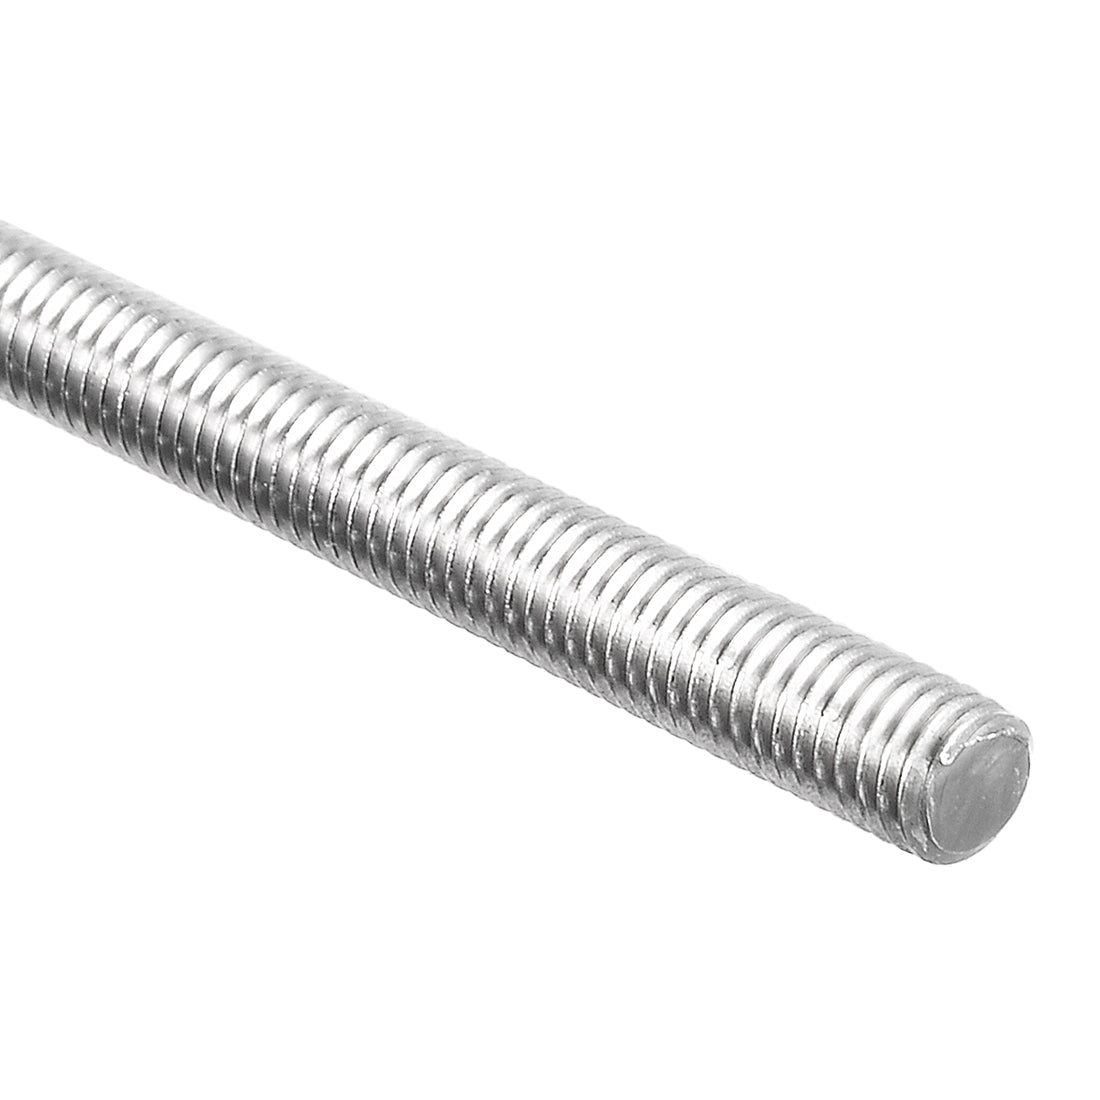 uxcell Uxcell M5 x 500mm Fully Threaded Rod 304 Stainless Steel Right Hand Threads